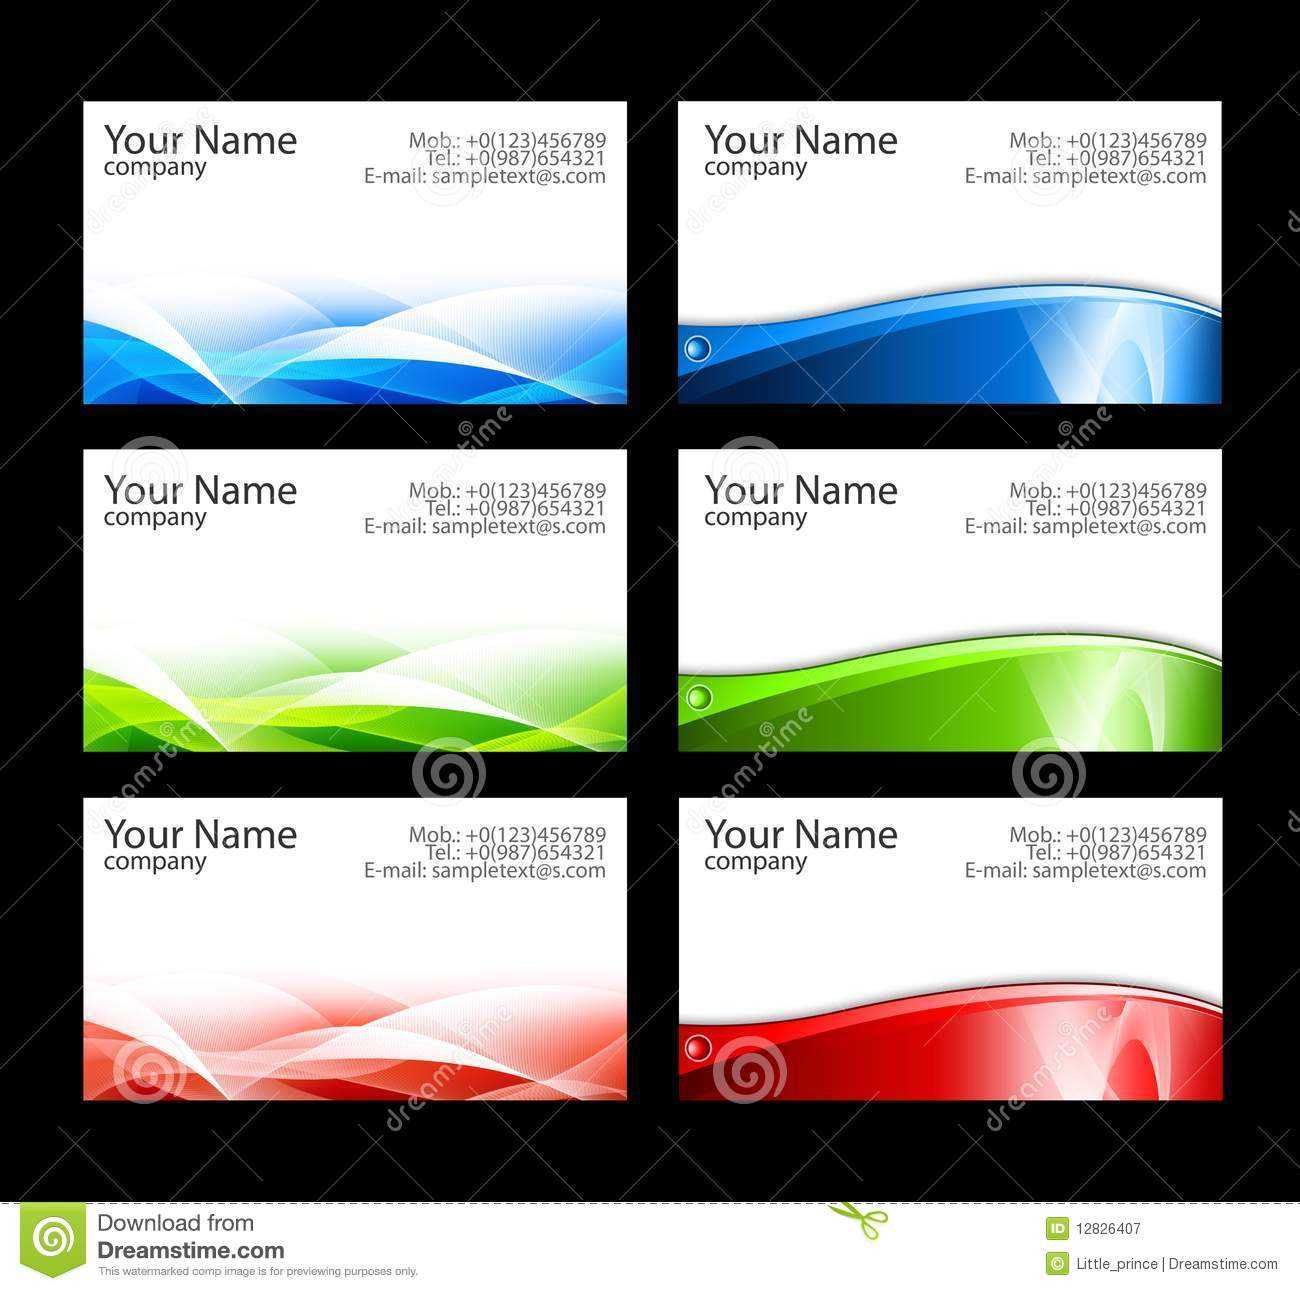 Business Cards Templates Stock Illustration. Illustration Of In Templates For Visiting Cards Free Downloads